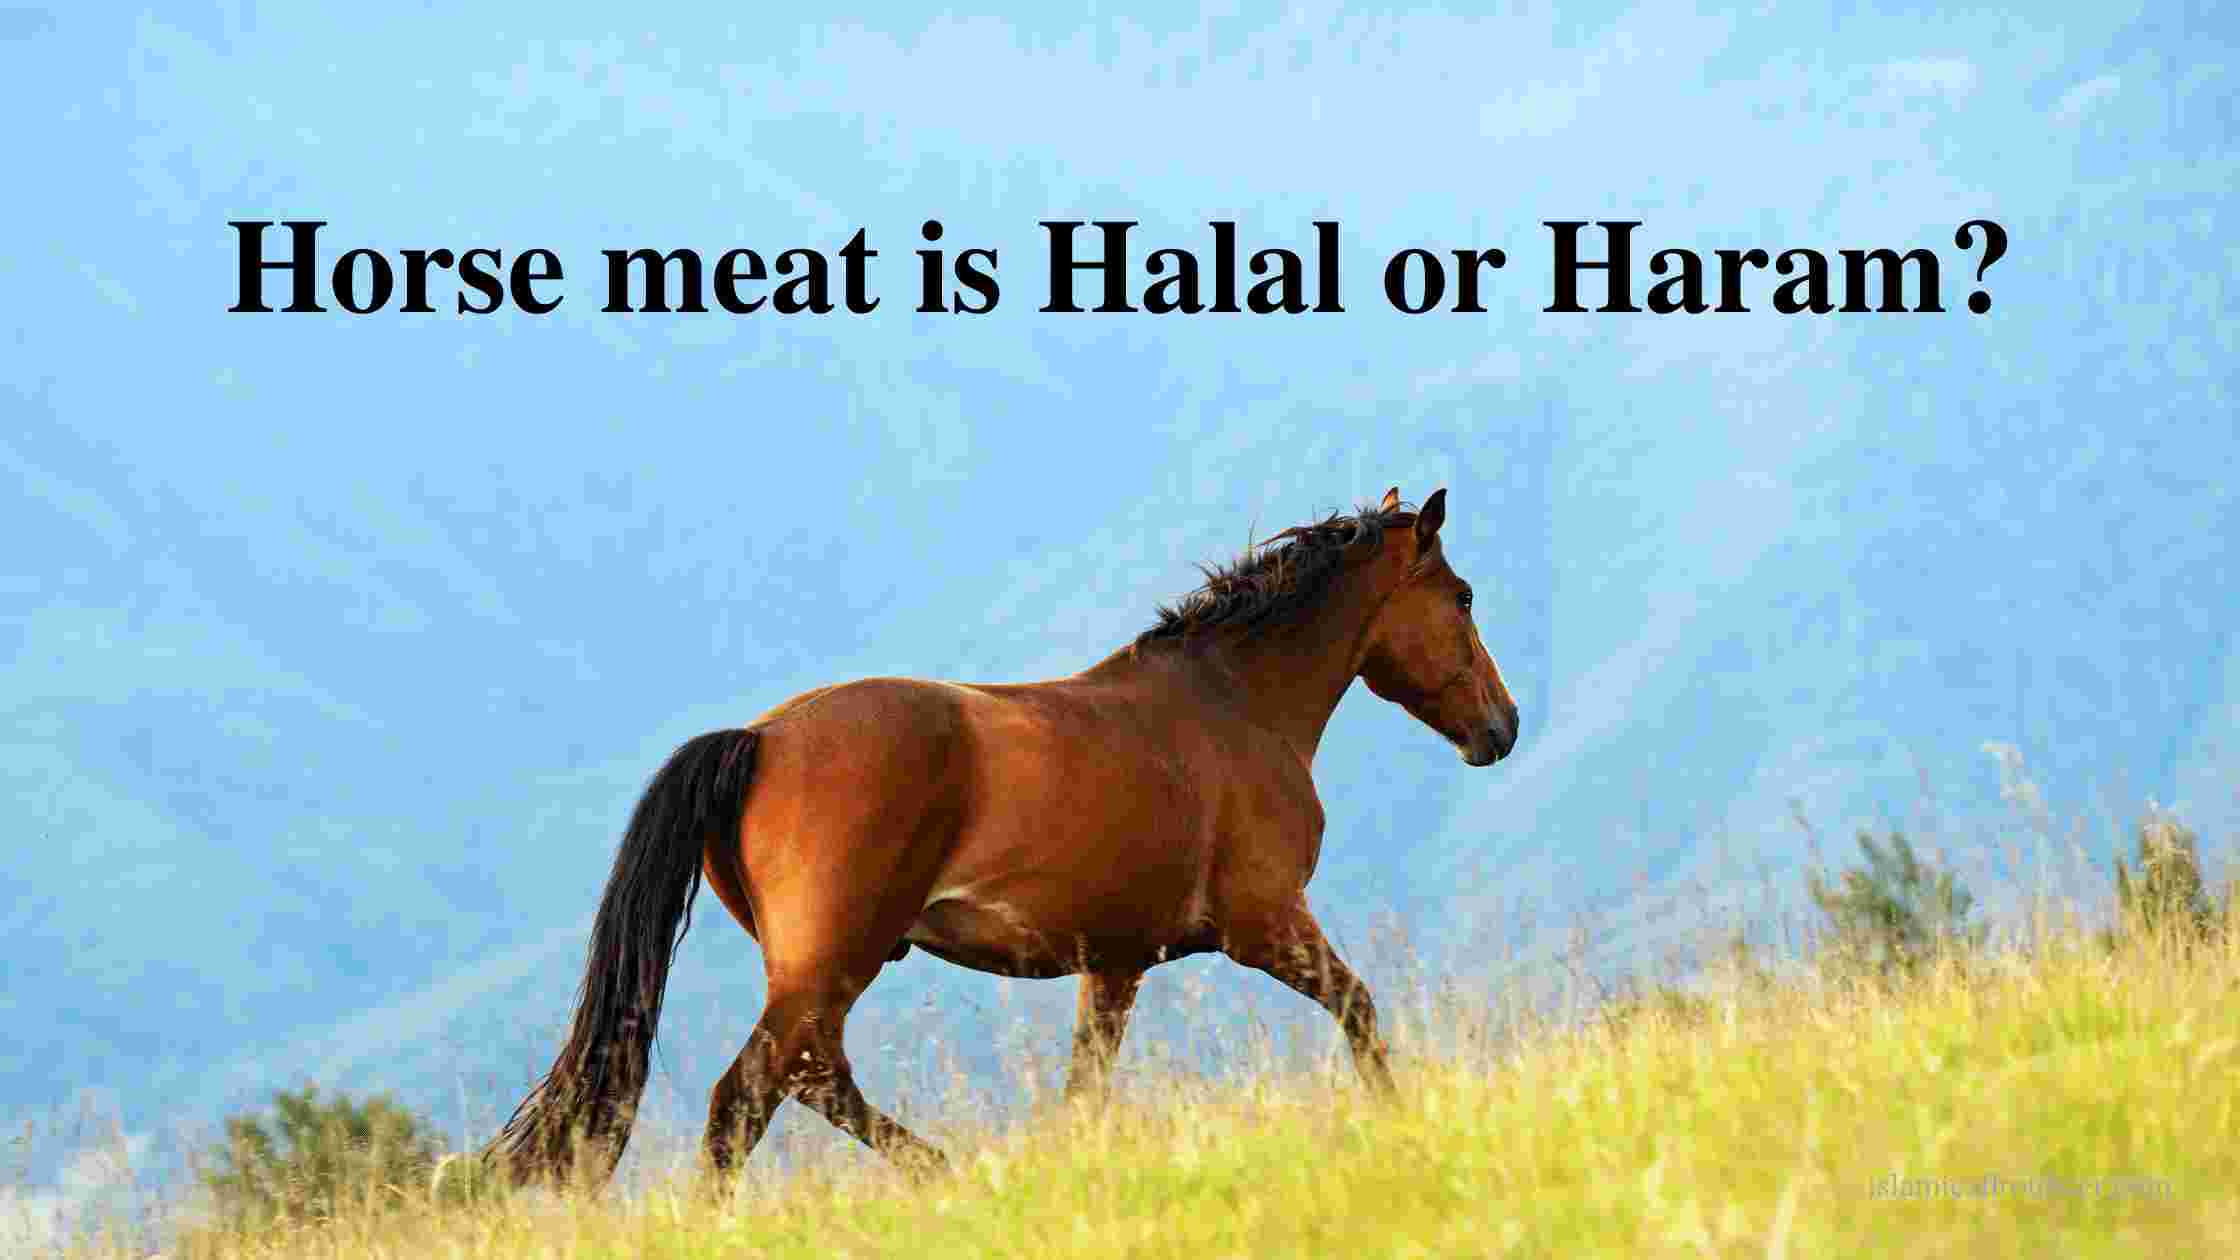 Horse meat is Halal or Haram